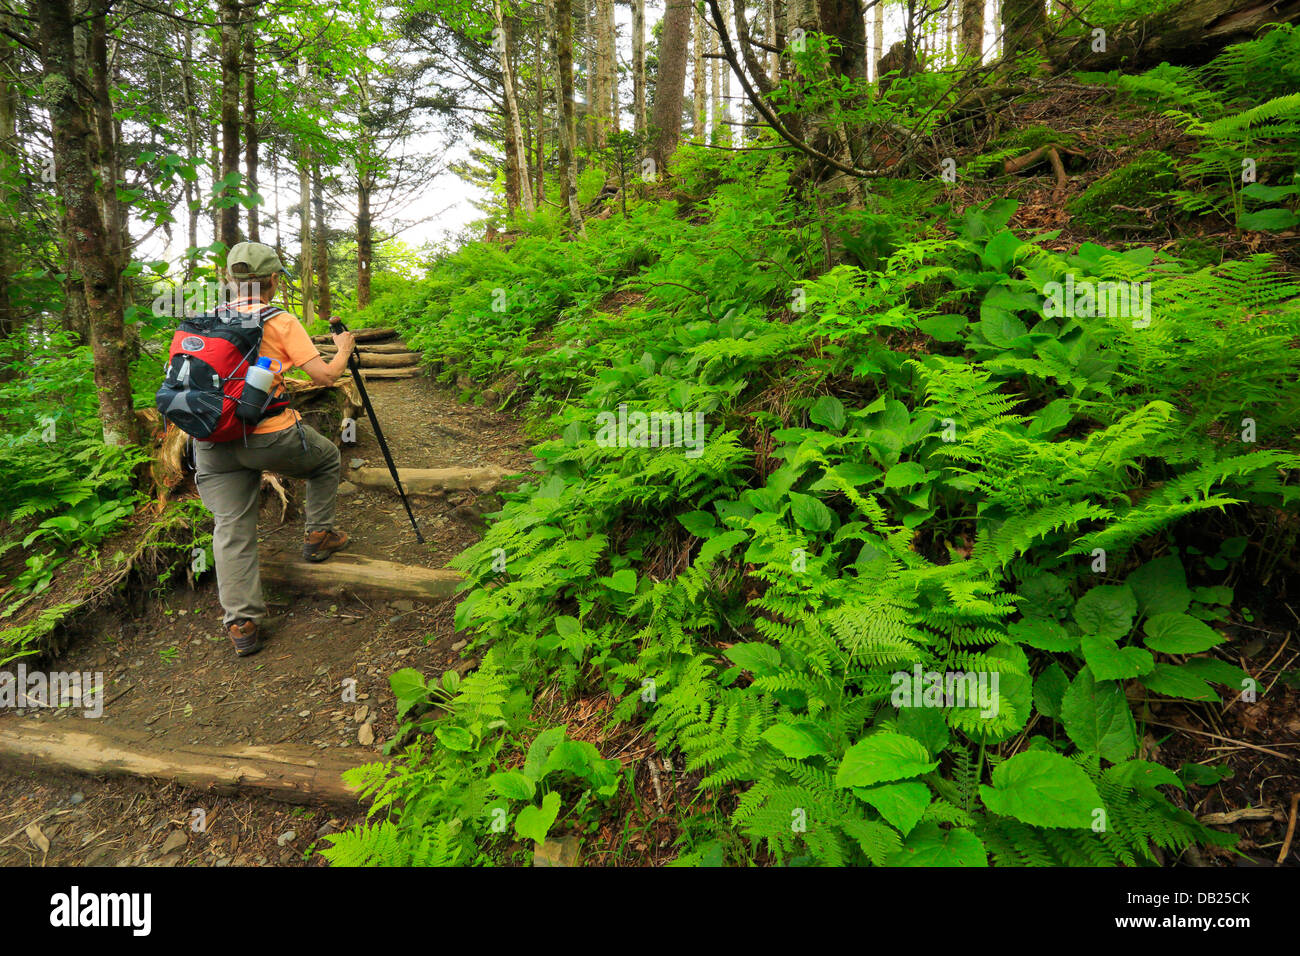 Cerca del muelle Icewater refugio, Charlie's juanete Trail, Great Smoky Mountains National Park, Carolina del Norte, Tennessee, EE.UU. Foto de stock